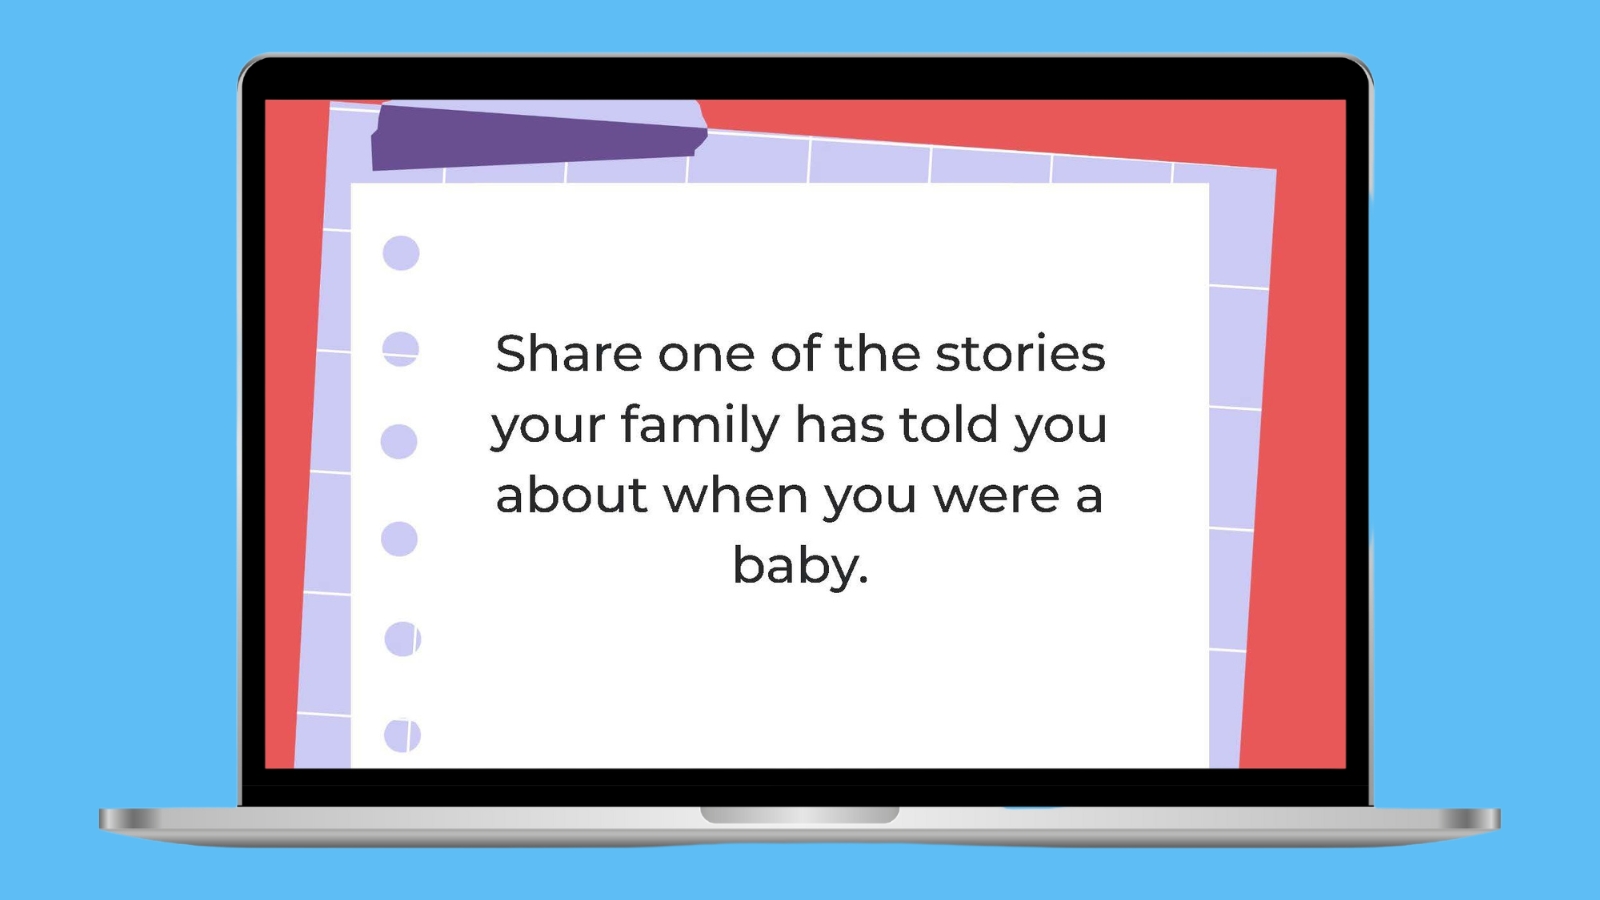 Share one of the stories your family has told you about when you were a baby.